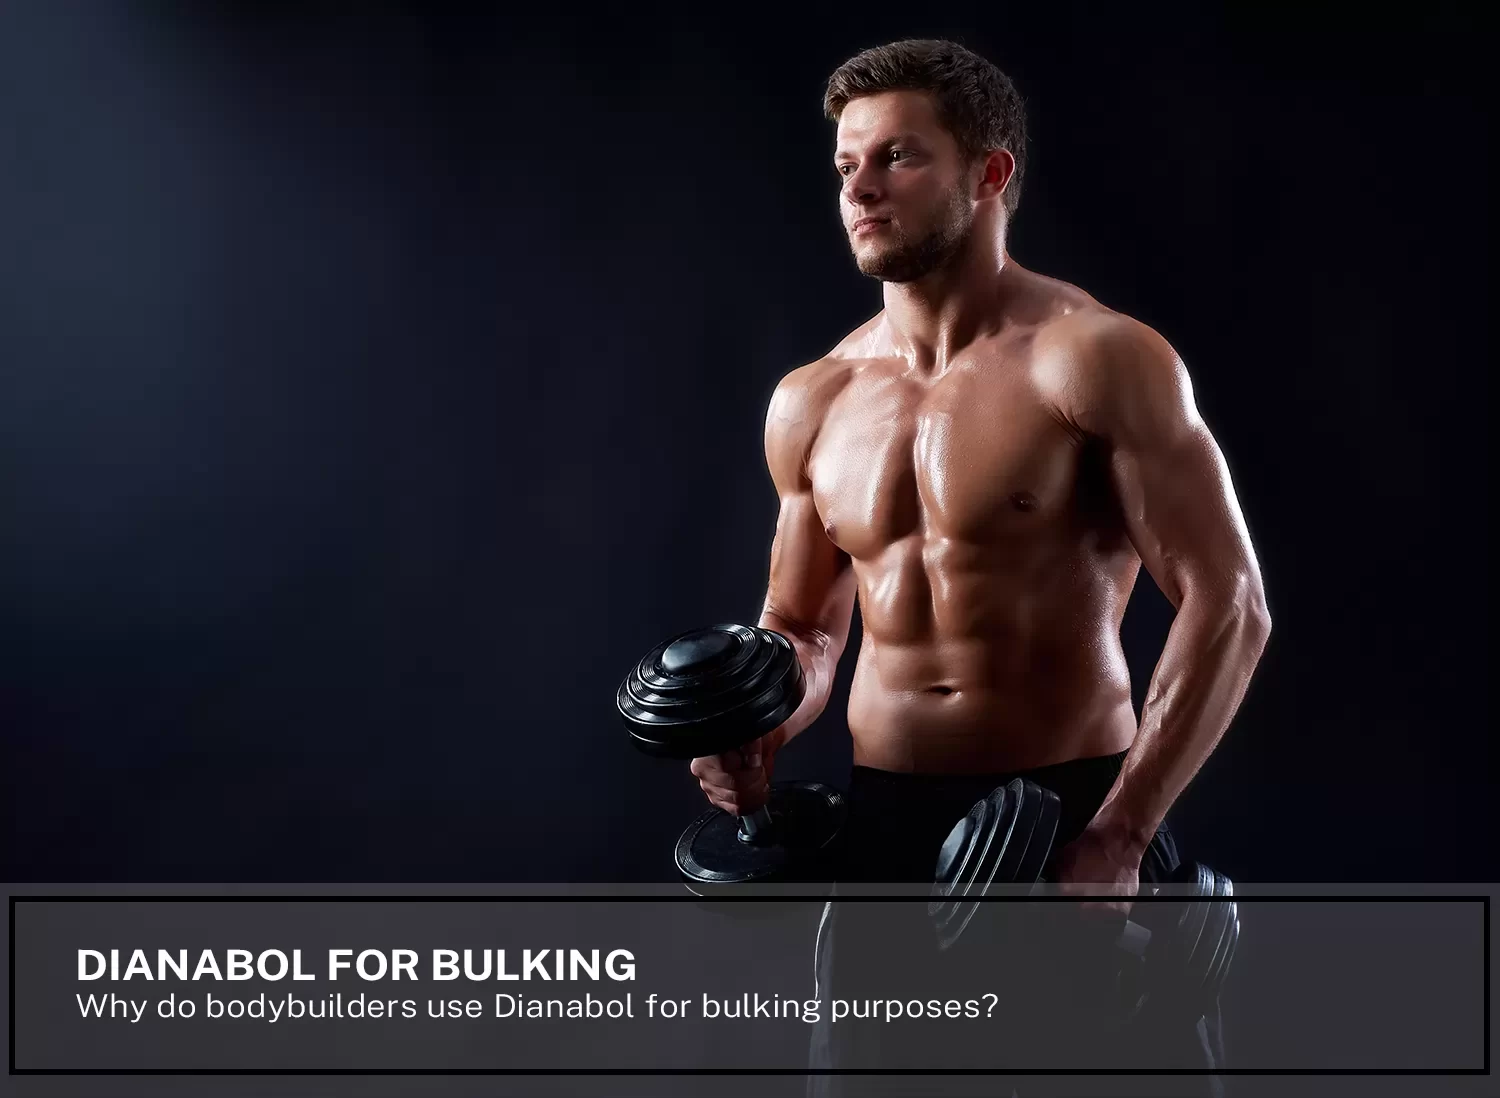 Why bodybuilders use Dianabol